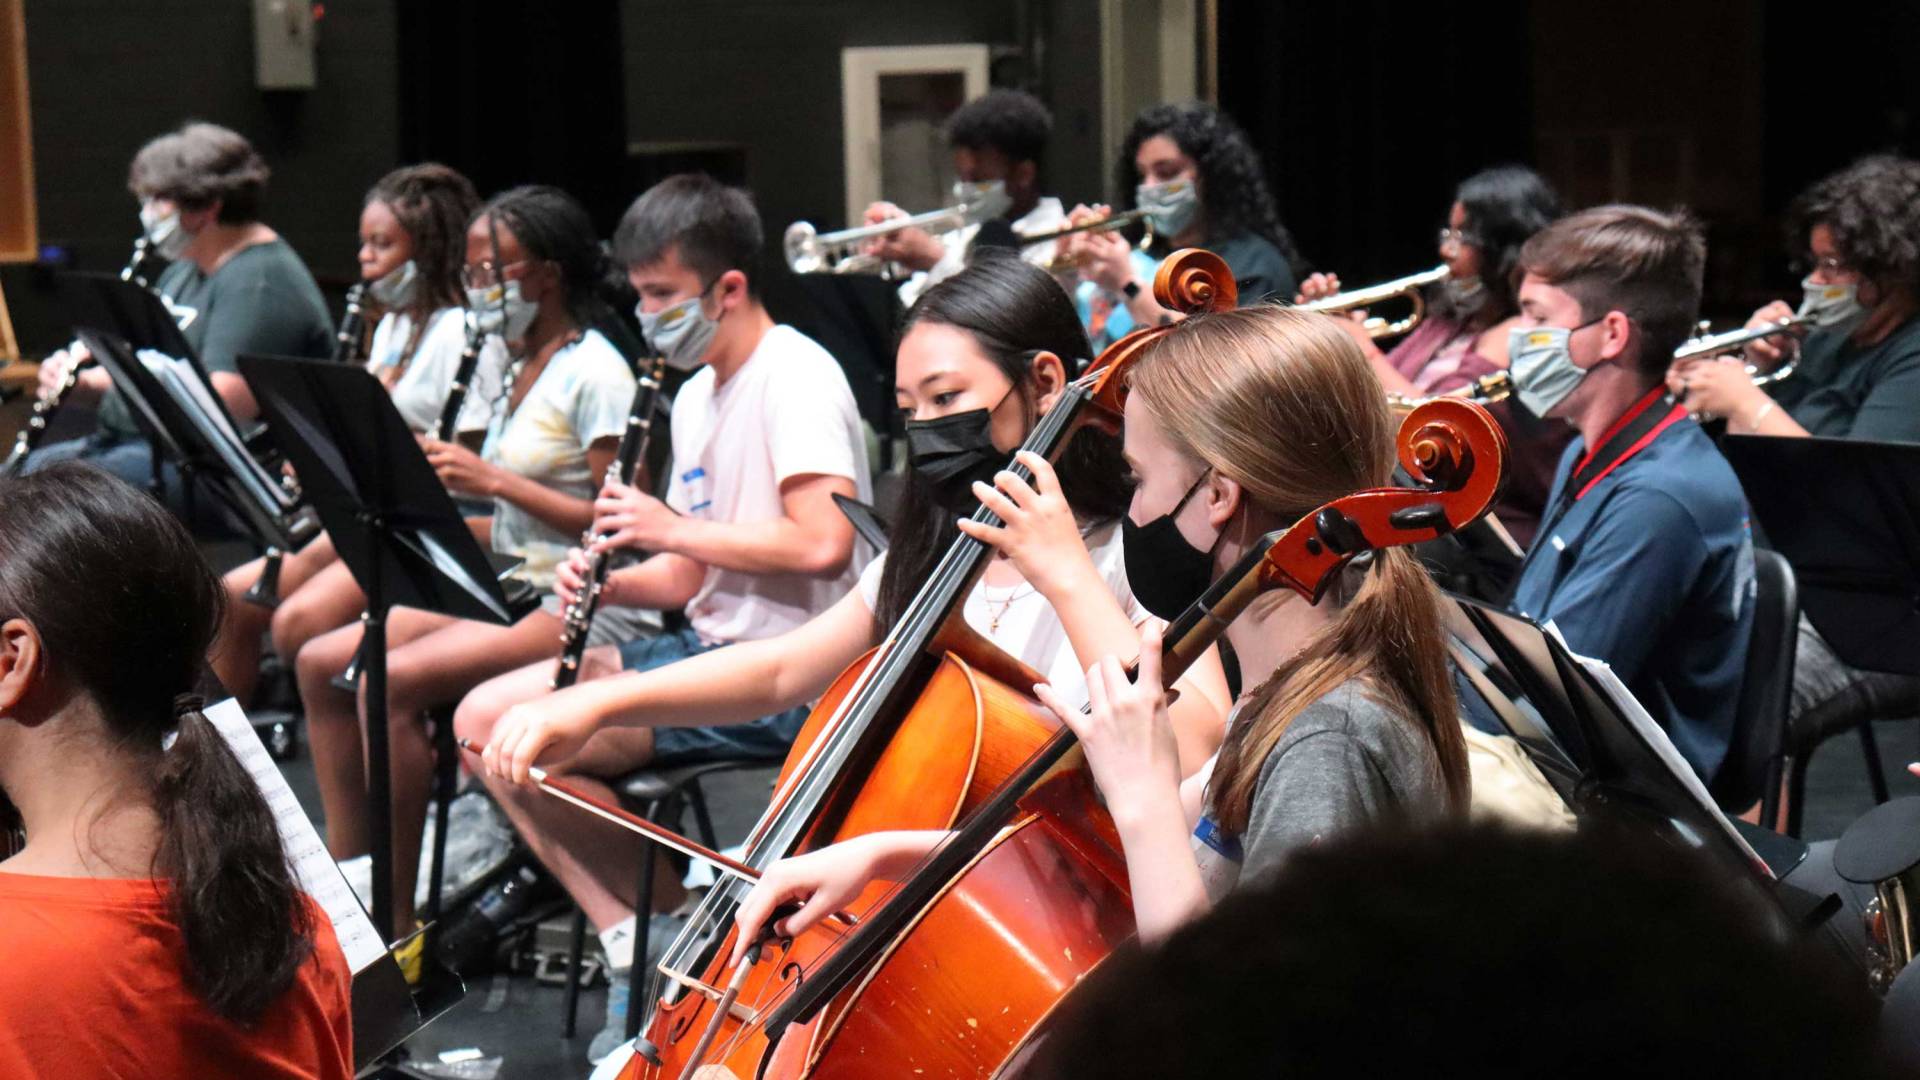 Students playing instruments in an orchestra